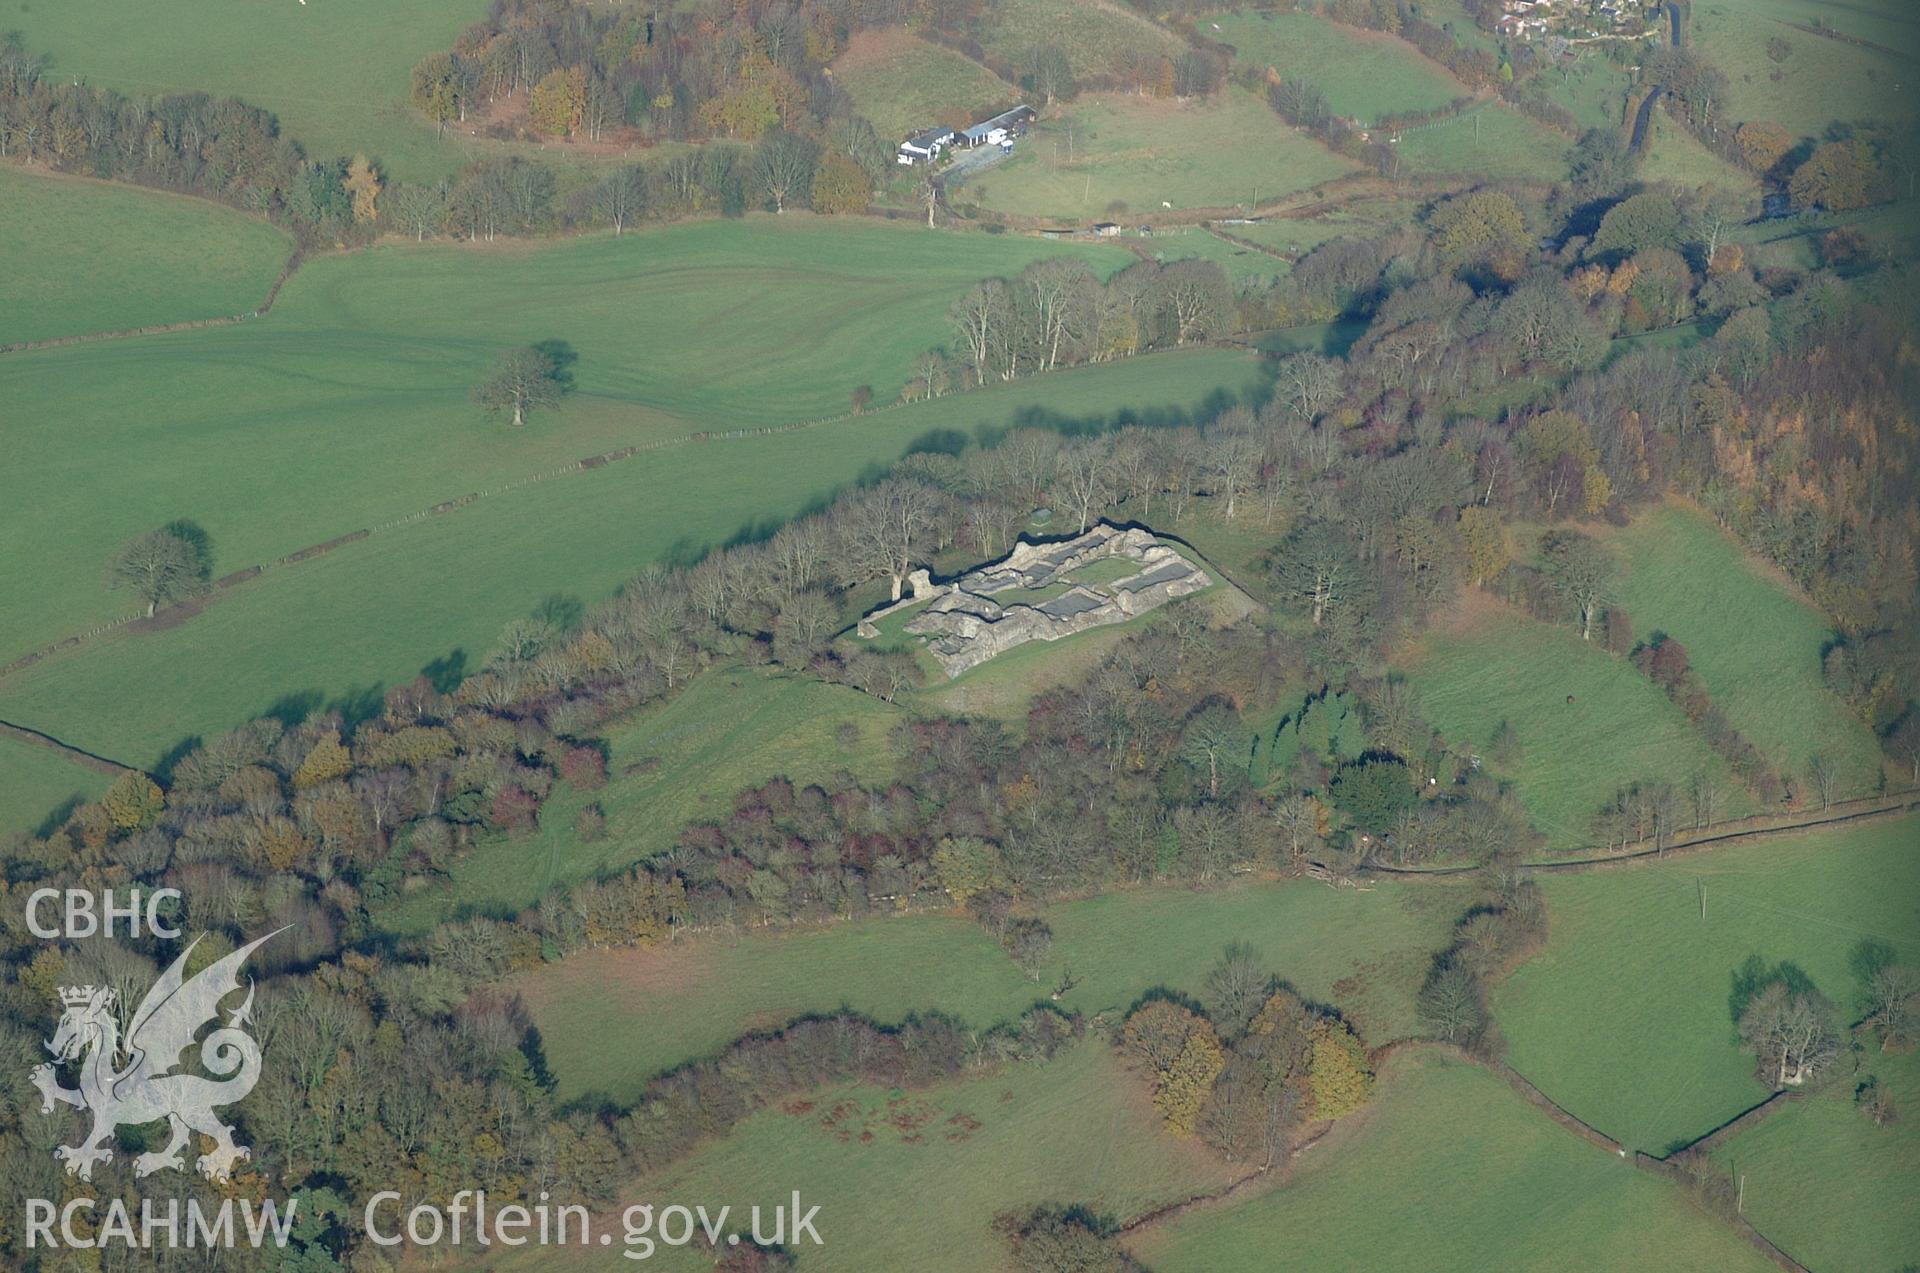 RCAHMW colour oblique aerial photograph of Dolforwyn Castle, Abermule. A distant view from the south. Taken on 19 November 2004 by Toby Driver